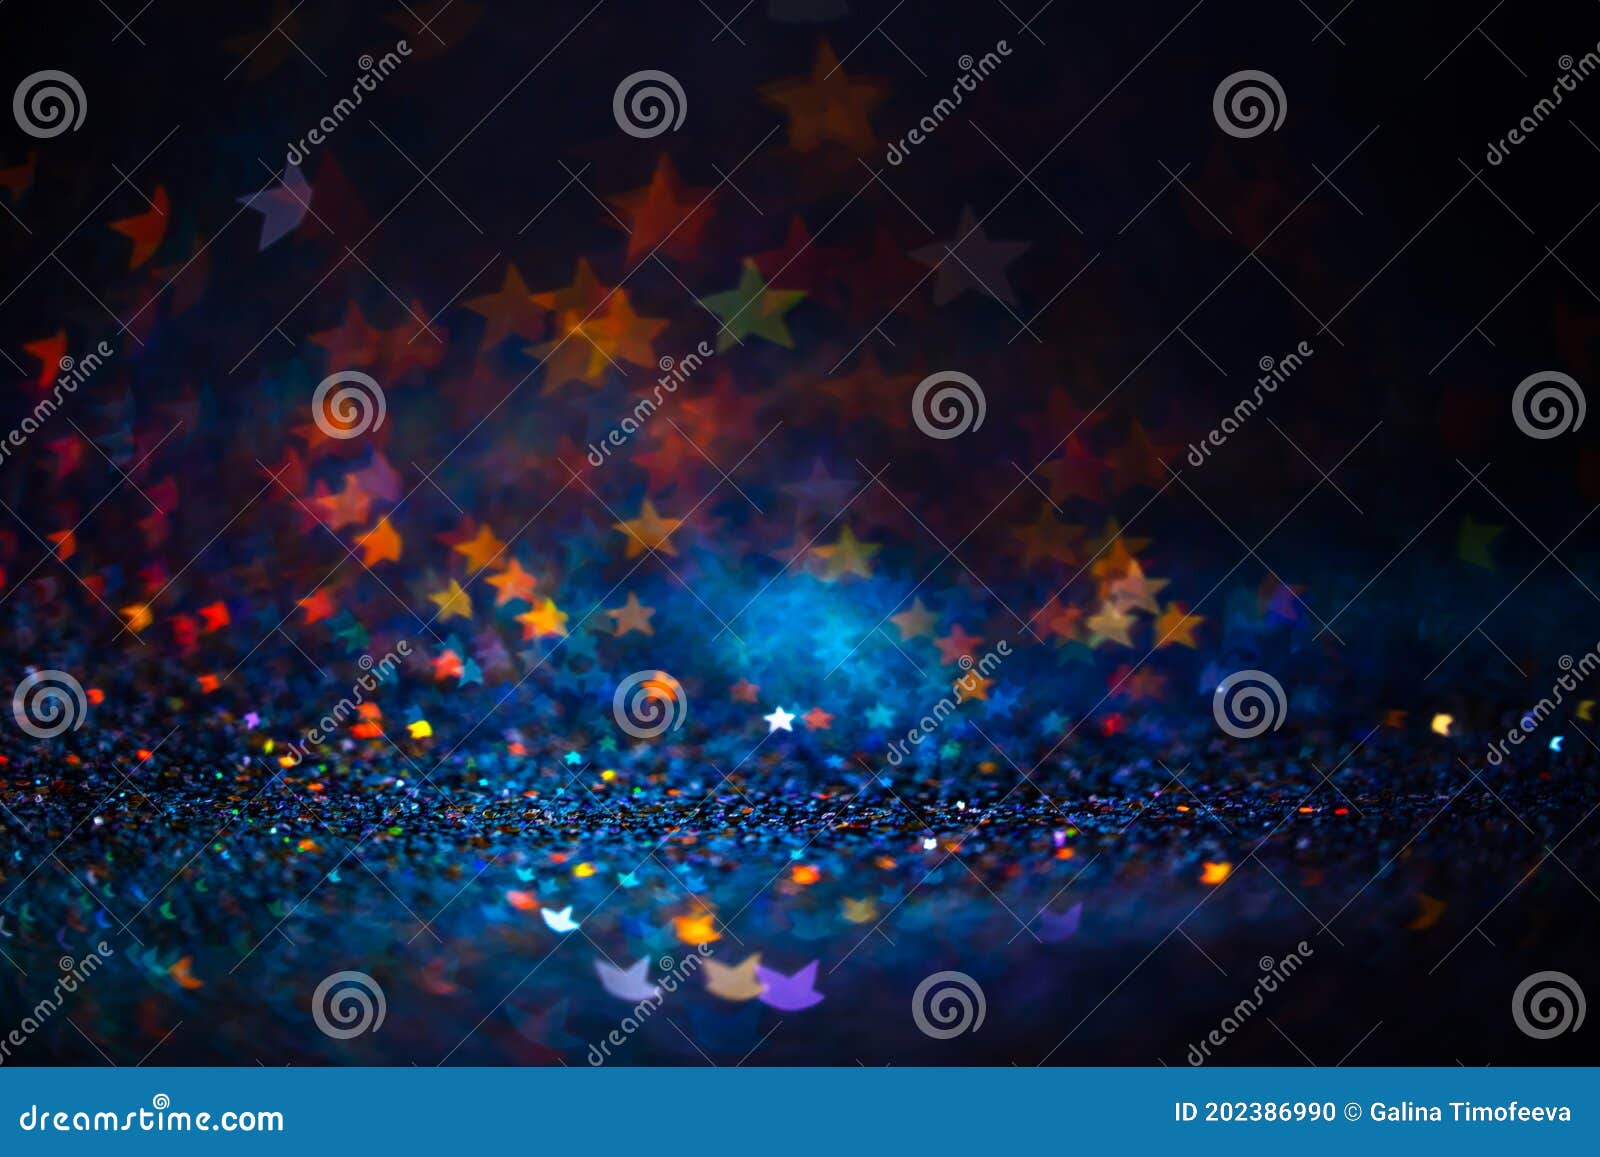 festive twinkle lights background, abstract sparkle backdrop with stars, modern  overlay with sparkling glimmers